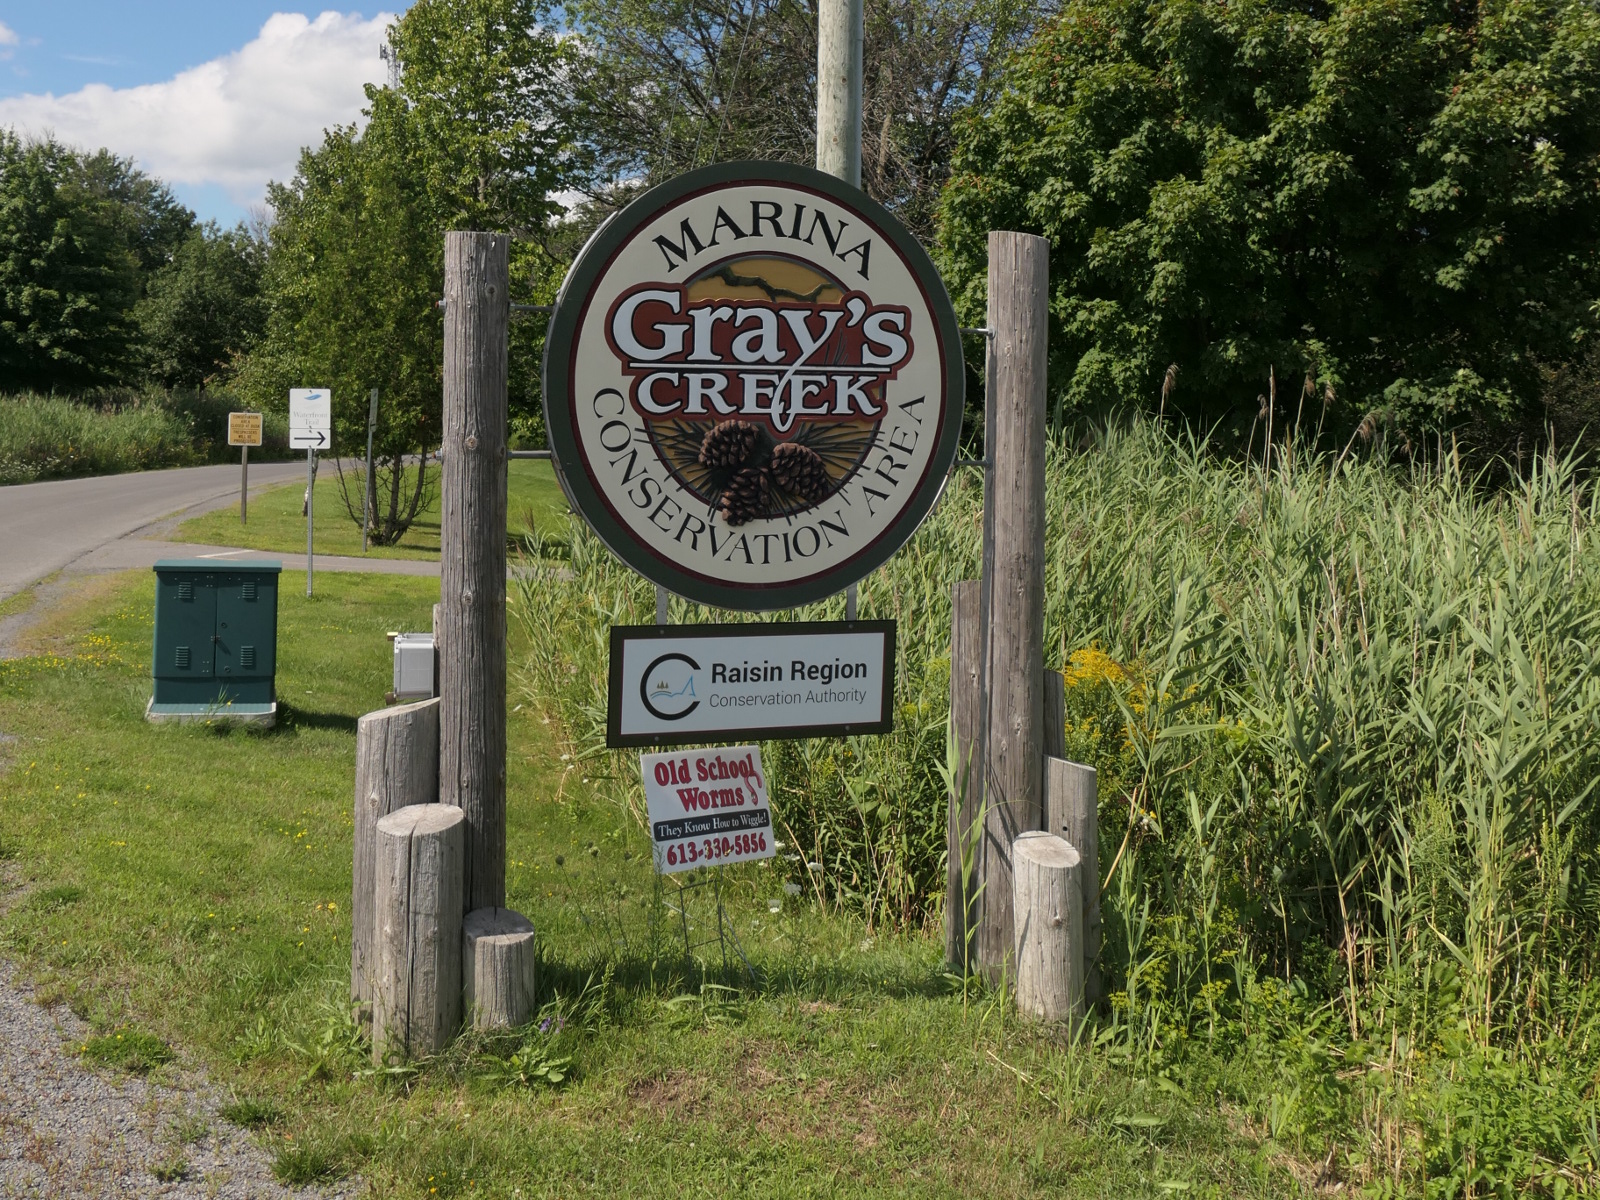 Gray's creek marina and conservation area